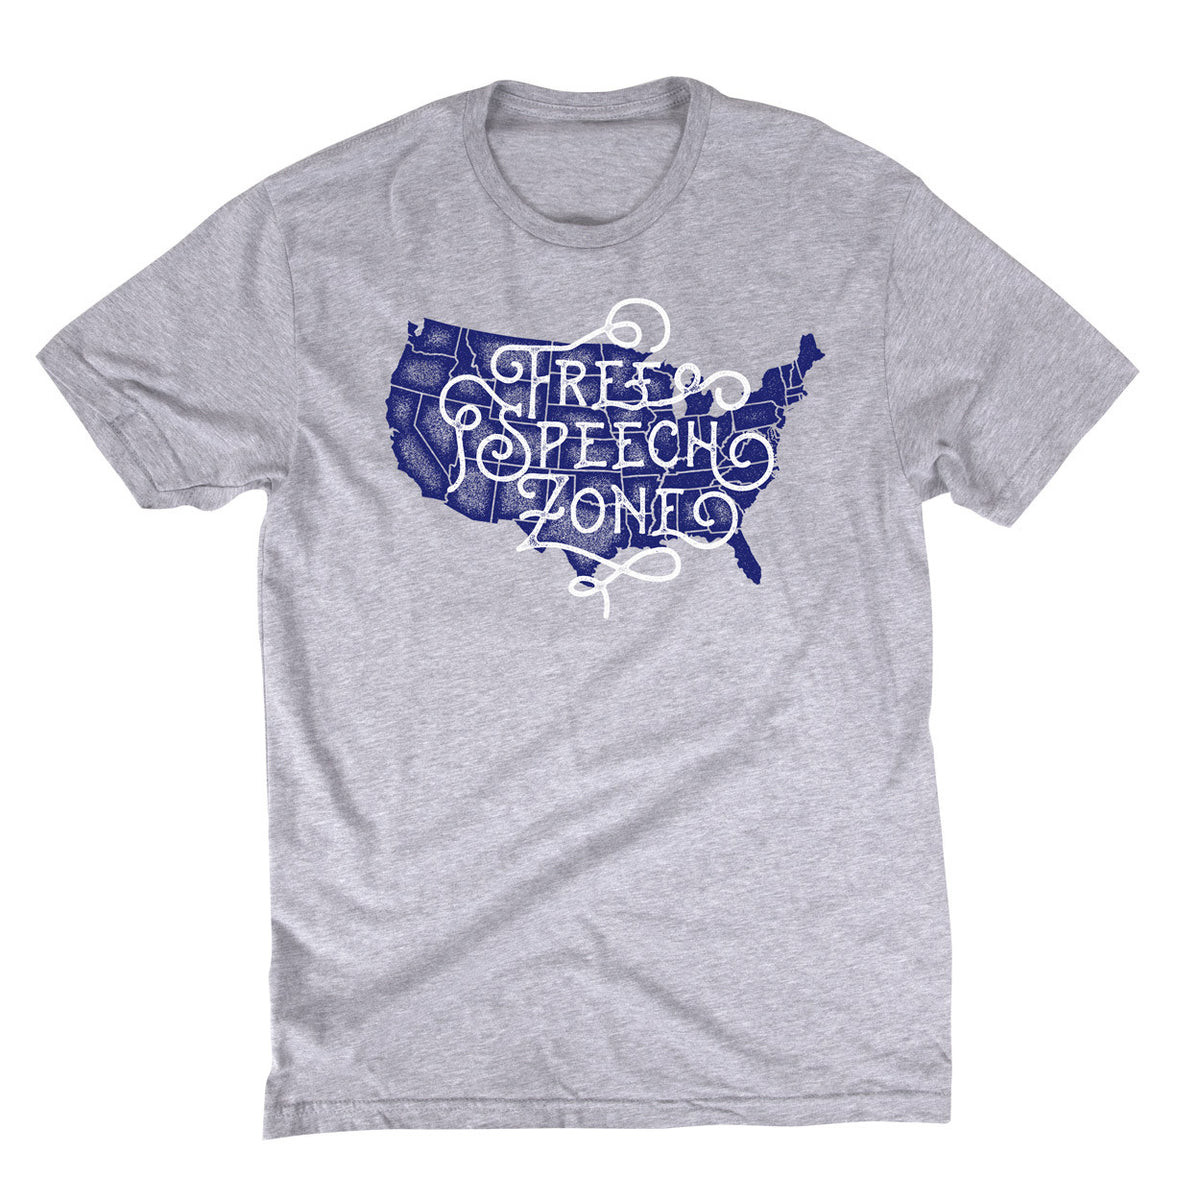 Free Speech Zone Athletic Grey Graphic Tee by Liberty Maniacs